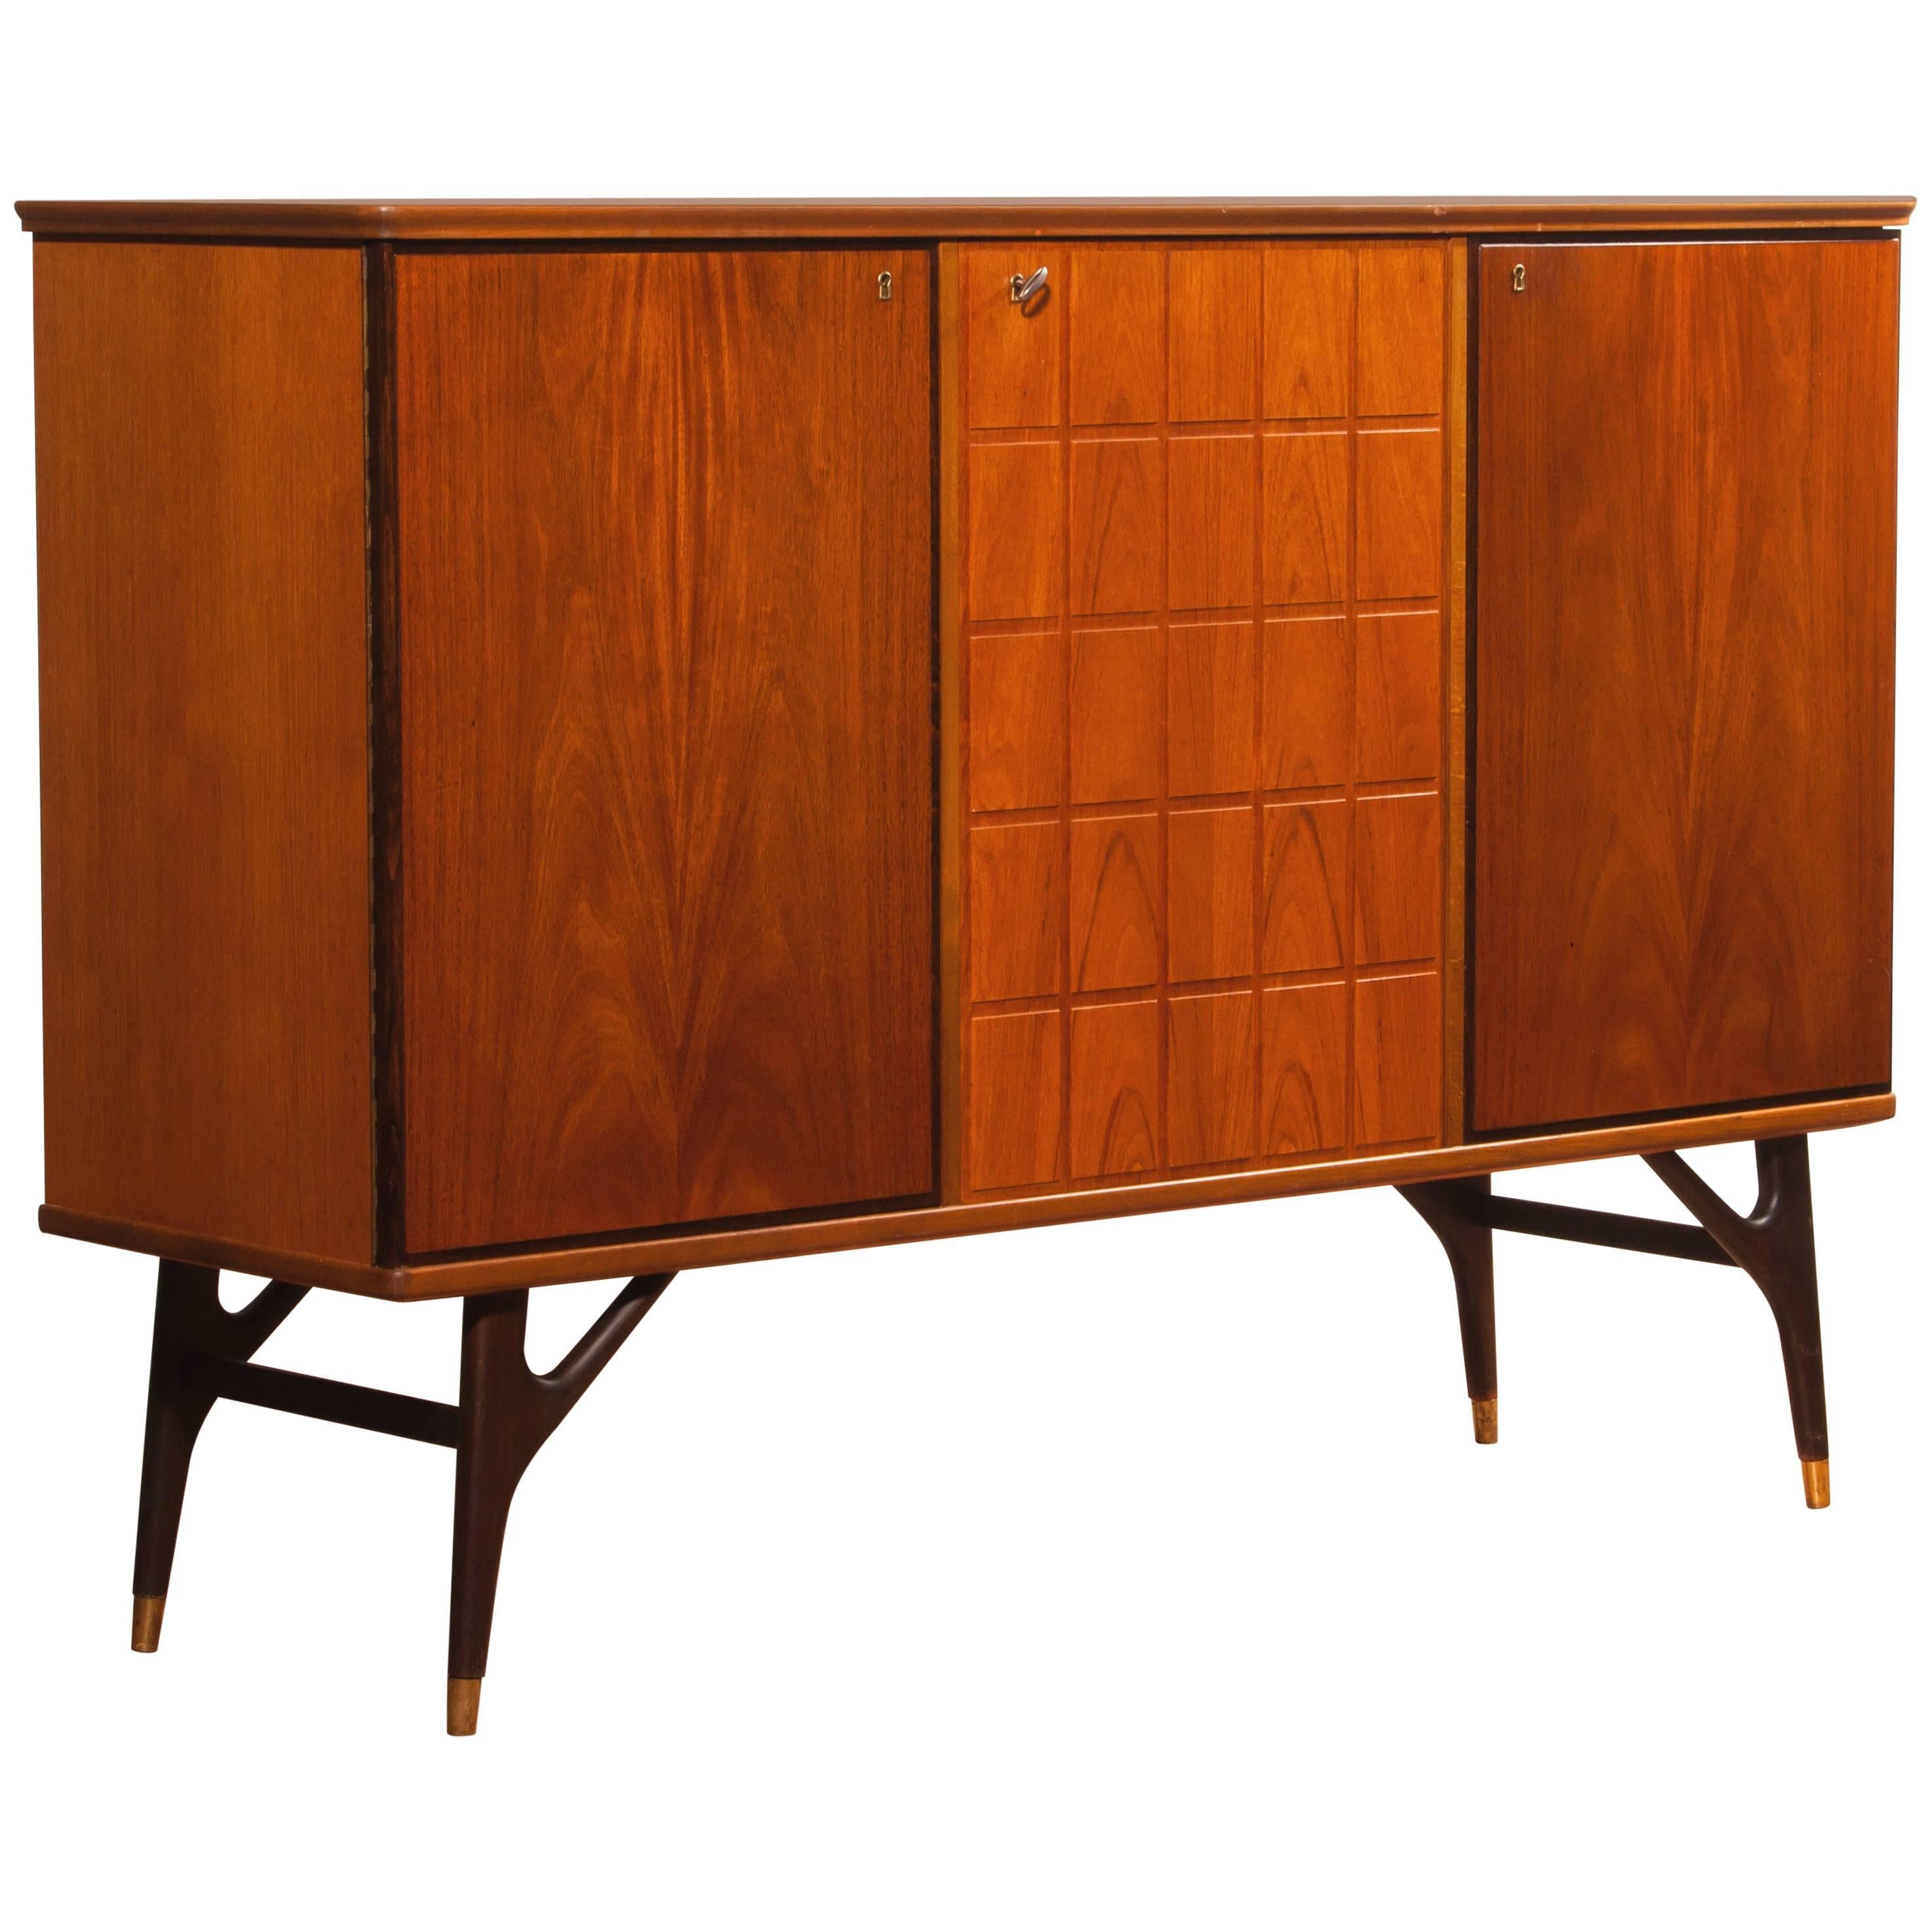 1950s Beautiful Sideboard With a Lot Of Details And Inside Drawers